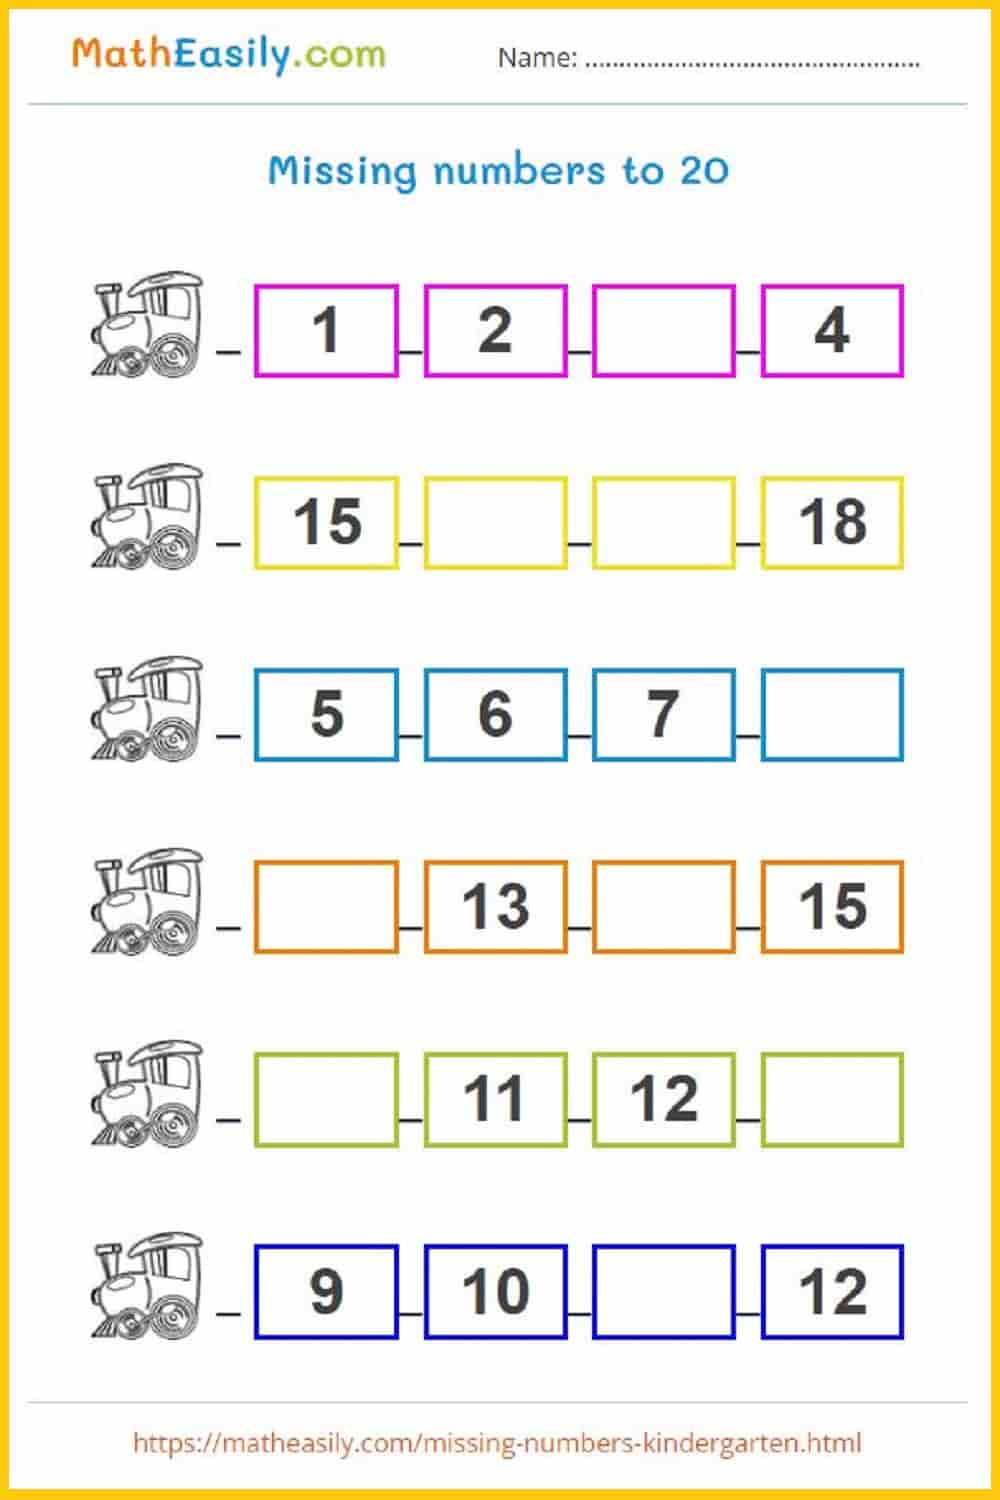 Missing Number Counting Worksheet Free Kindergarten Math Worksheet Missing Number Worksheet 